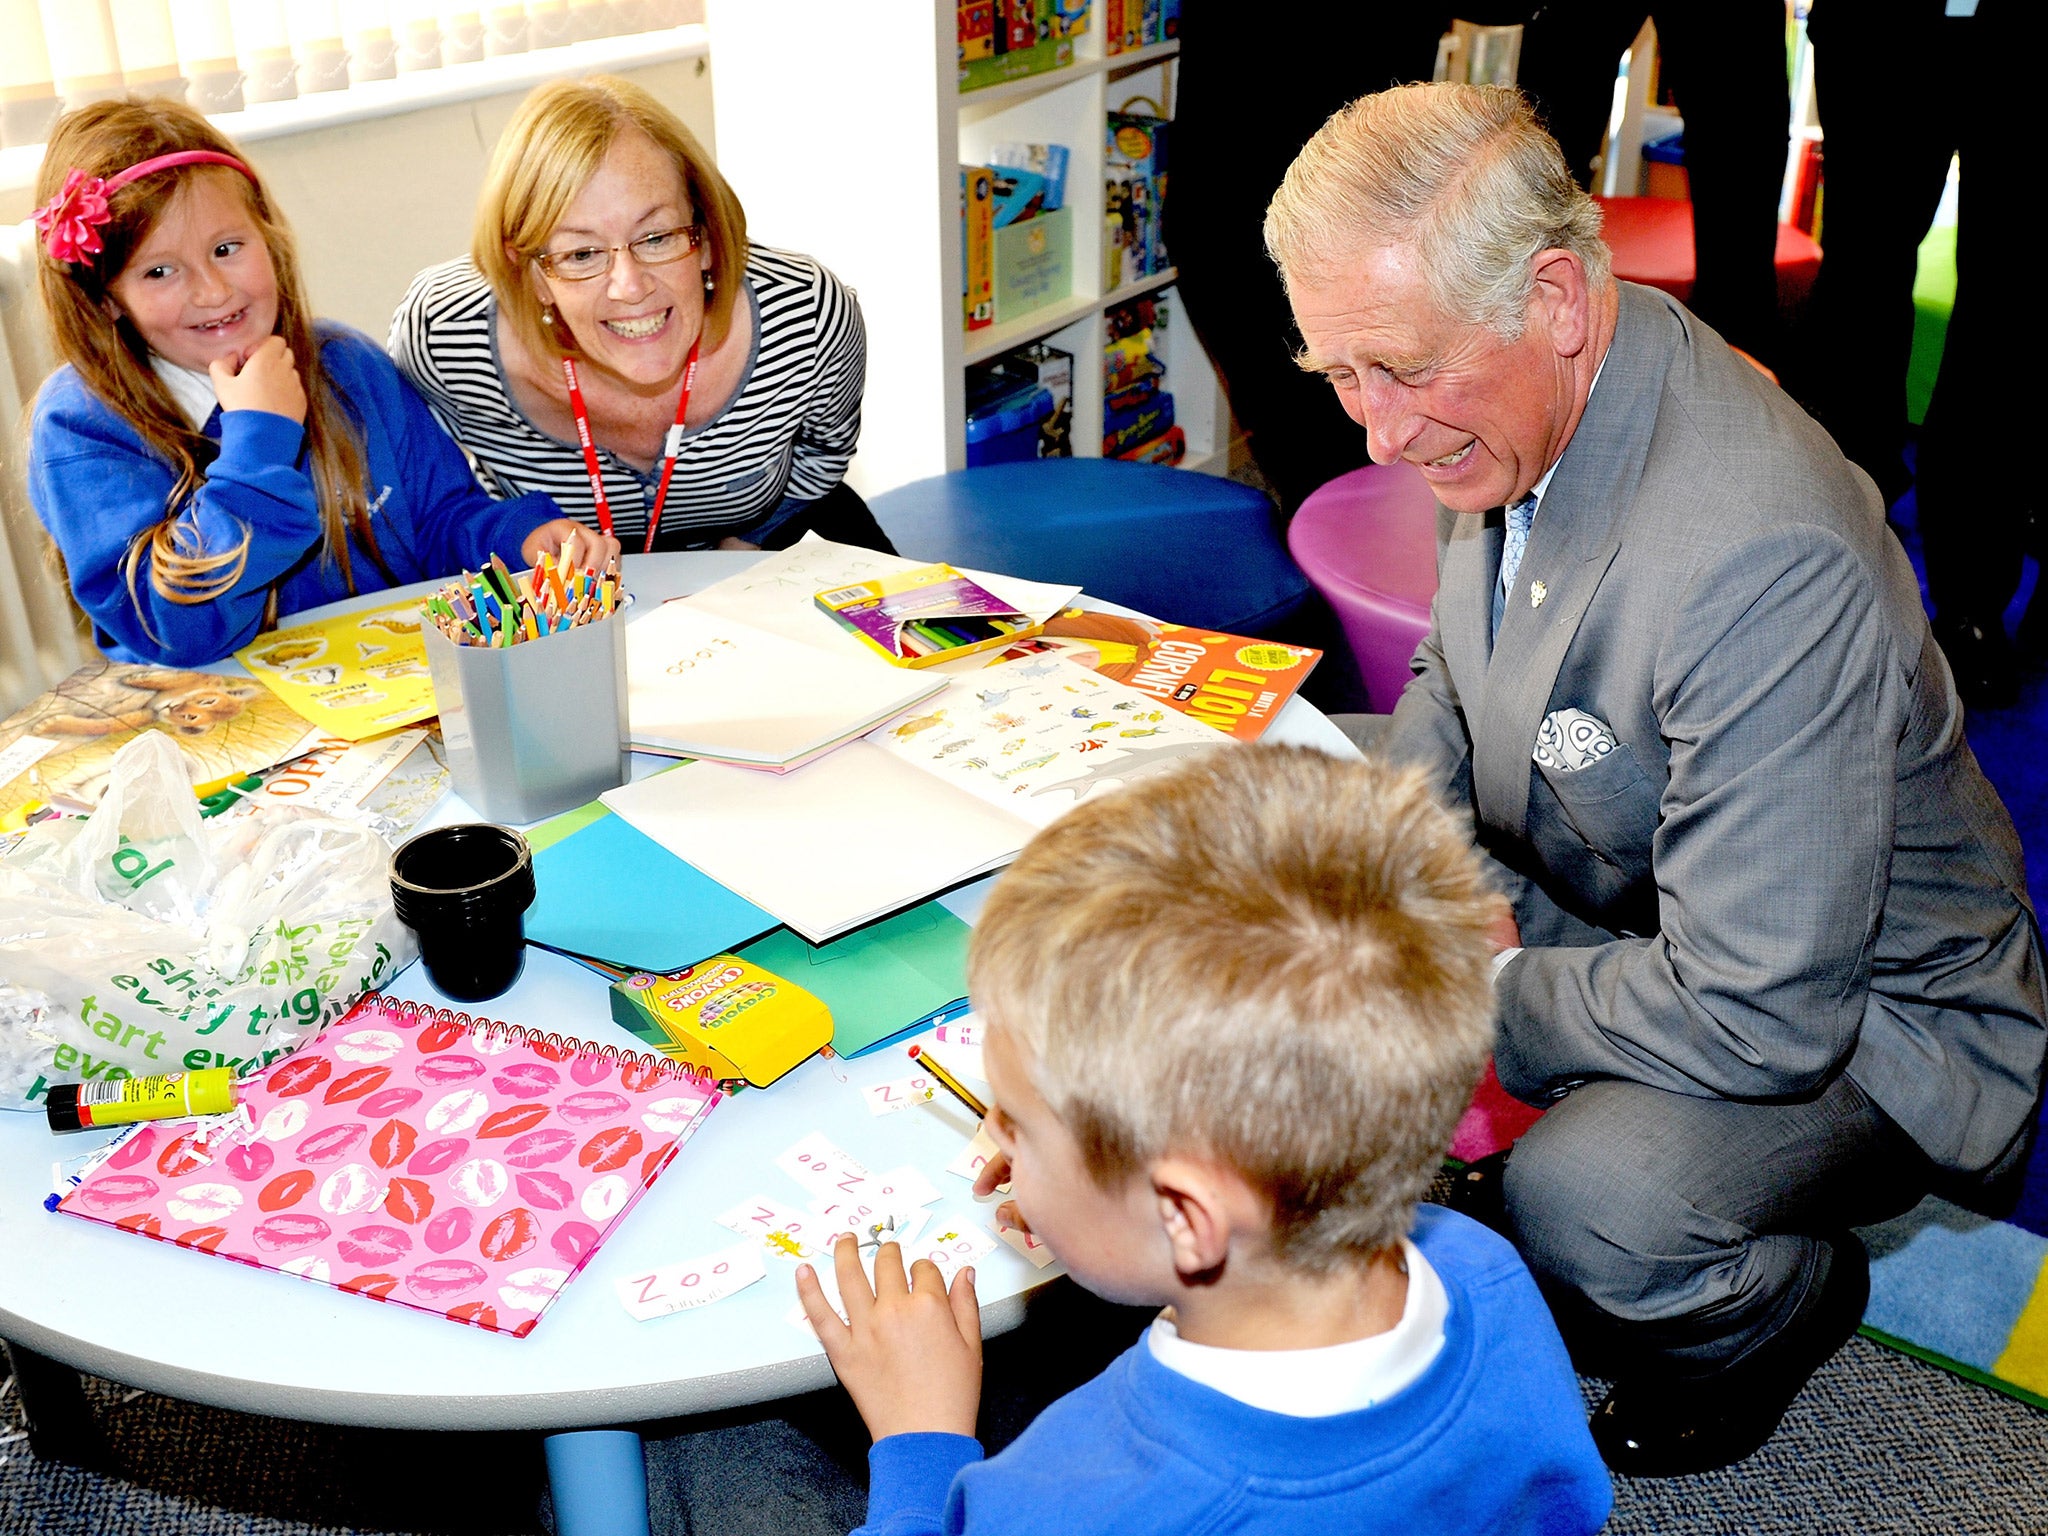 The Prince of Wales visiting a primary school last year